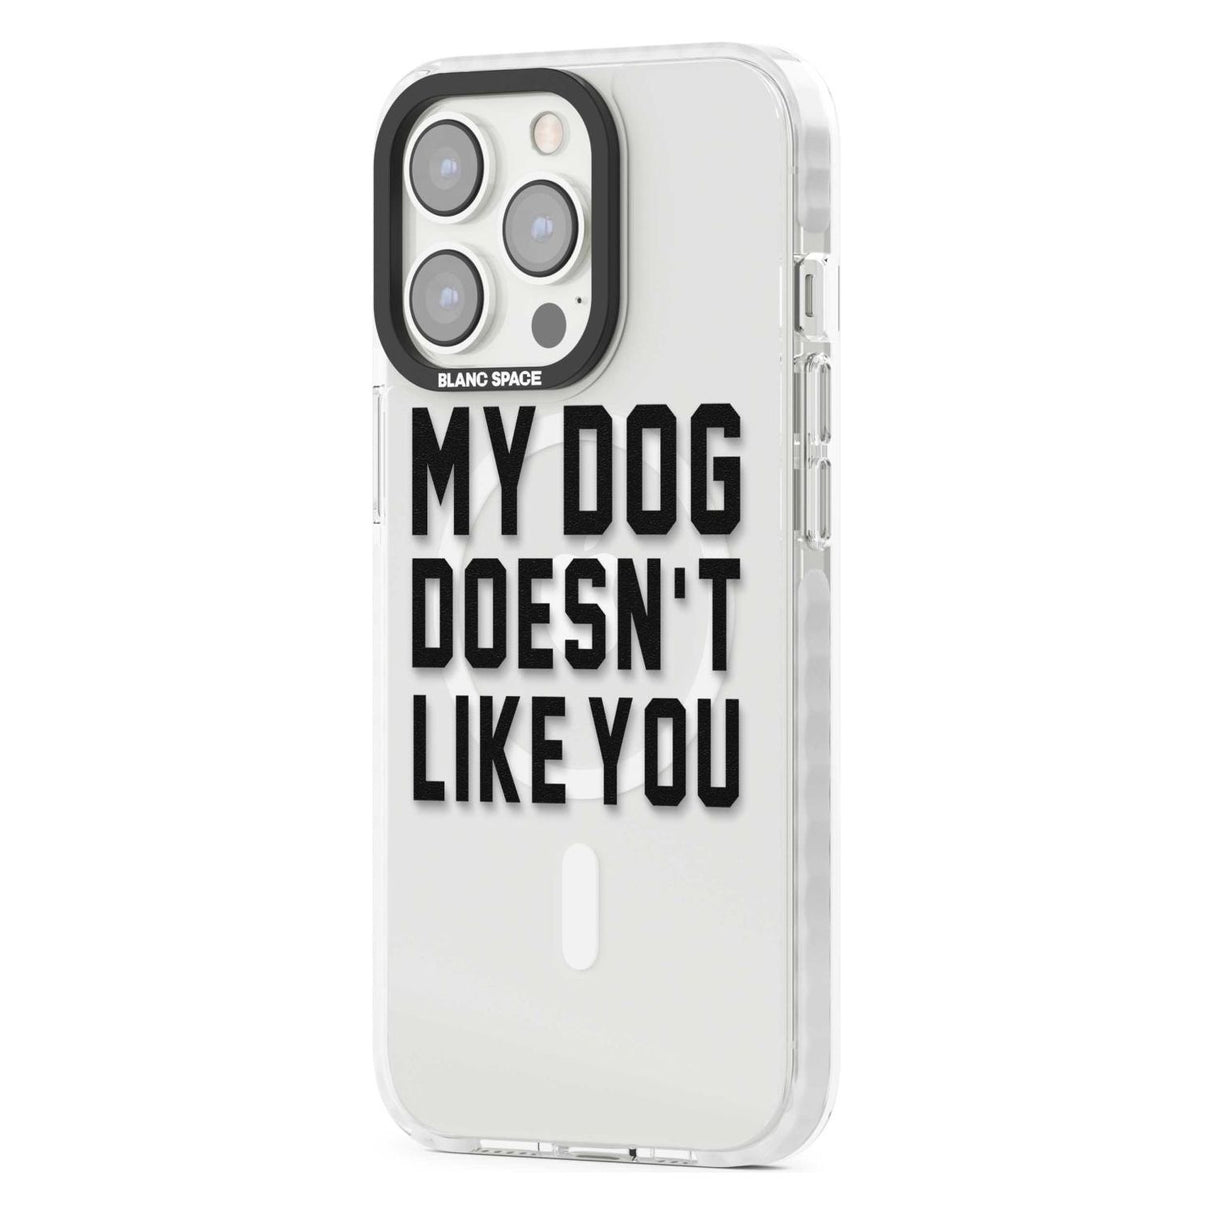 Dog Doesn't Like You Phone Case iPhone 15 Pro Max / Black Impact Case,iPhone 15 Plus / Black Impact Case,iPhone 15 Pro / Black Impact Case,iPhone 15 / Black Impact Case,iPhone 15 Pro Max / Impact Case,iPhone 15 Plus / Impact Case,iPhone 15 Pro / Impact Case,iPhone 15 / Impact Case,iPhone 15 Pro Max / Magsafe Black Impact Case,iPhone 15 Plus / Magsafe Black Impact Case,iPhone 15 Pro / Magsafe Black Impact Case,iPhone 15 / Magsafe Black Impact Case,iPhone 14 Pro Max / Black Impact Case,iPhone 14 Plus / Black 